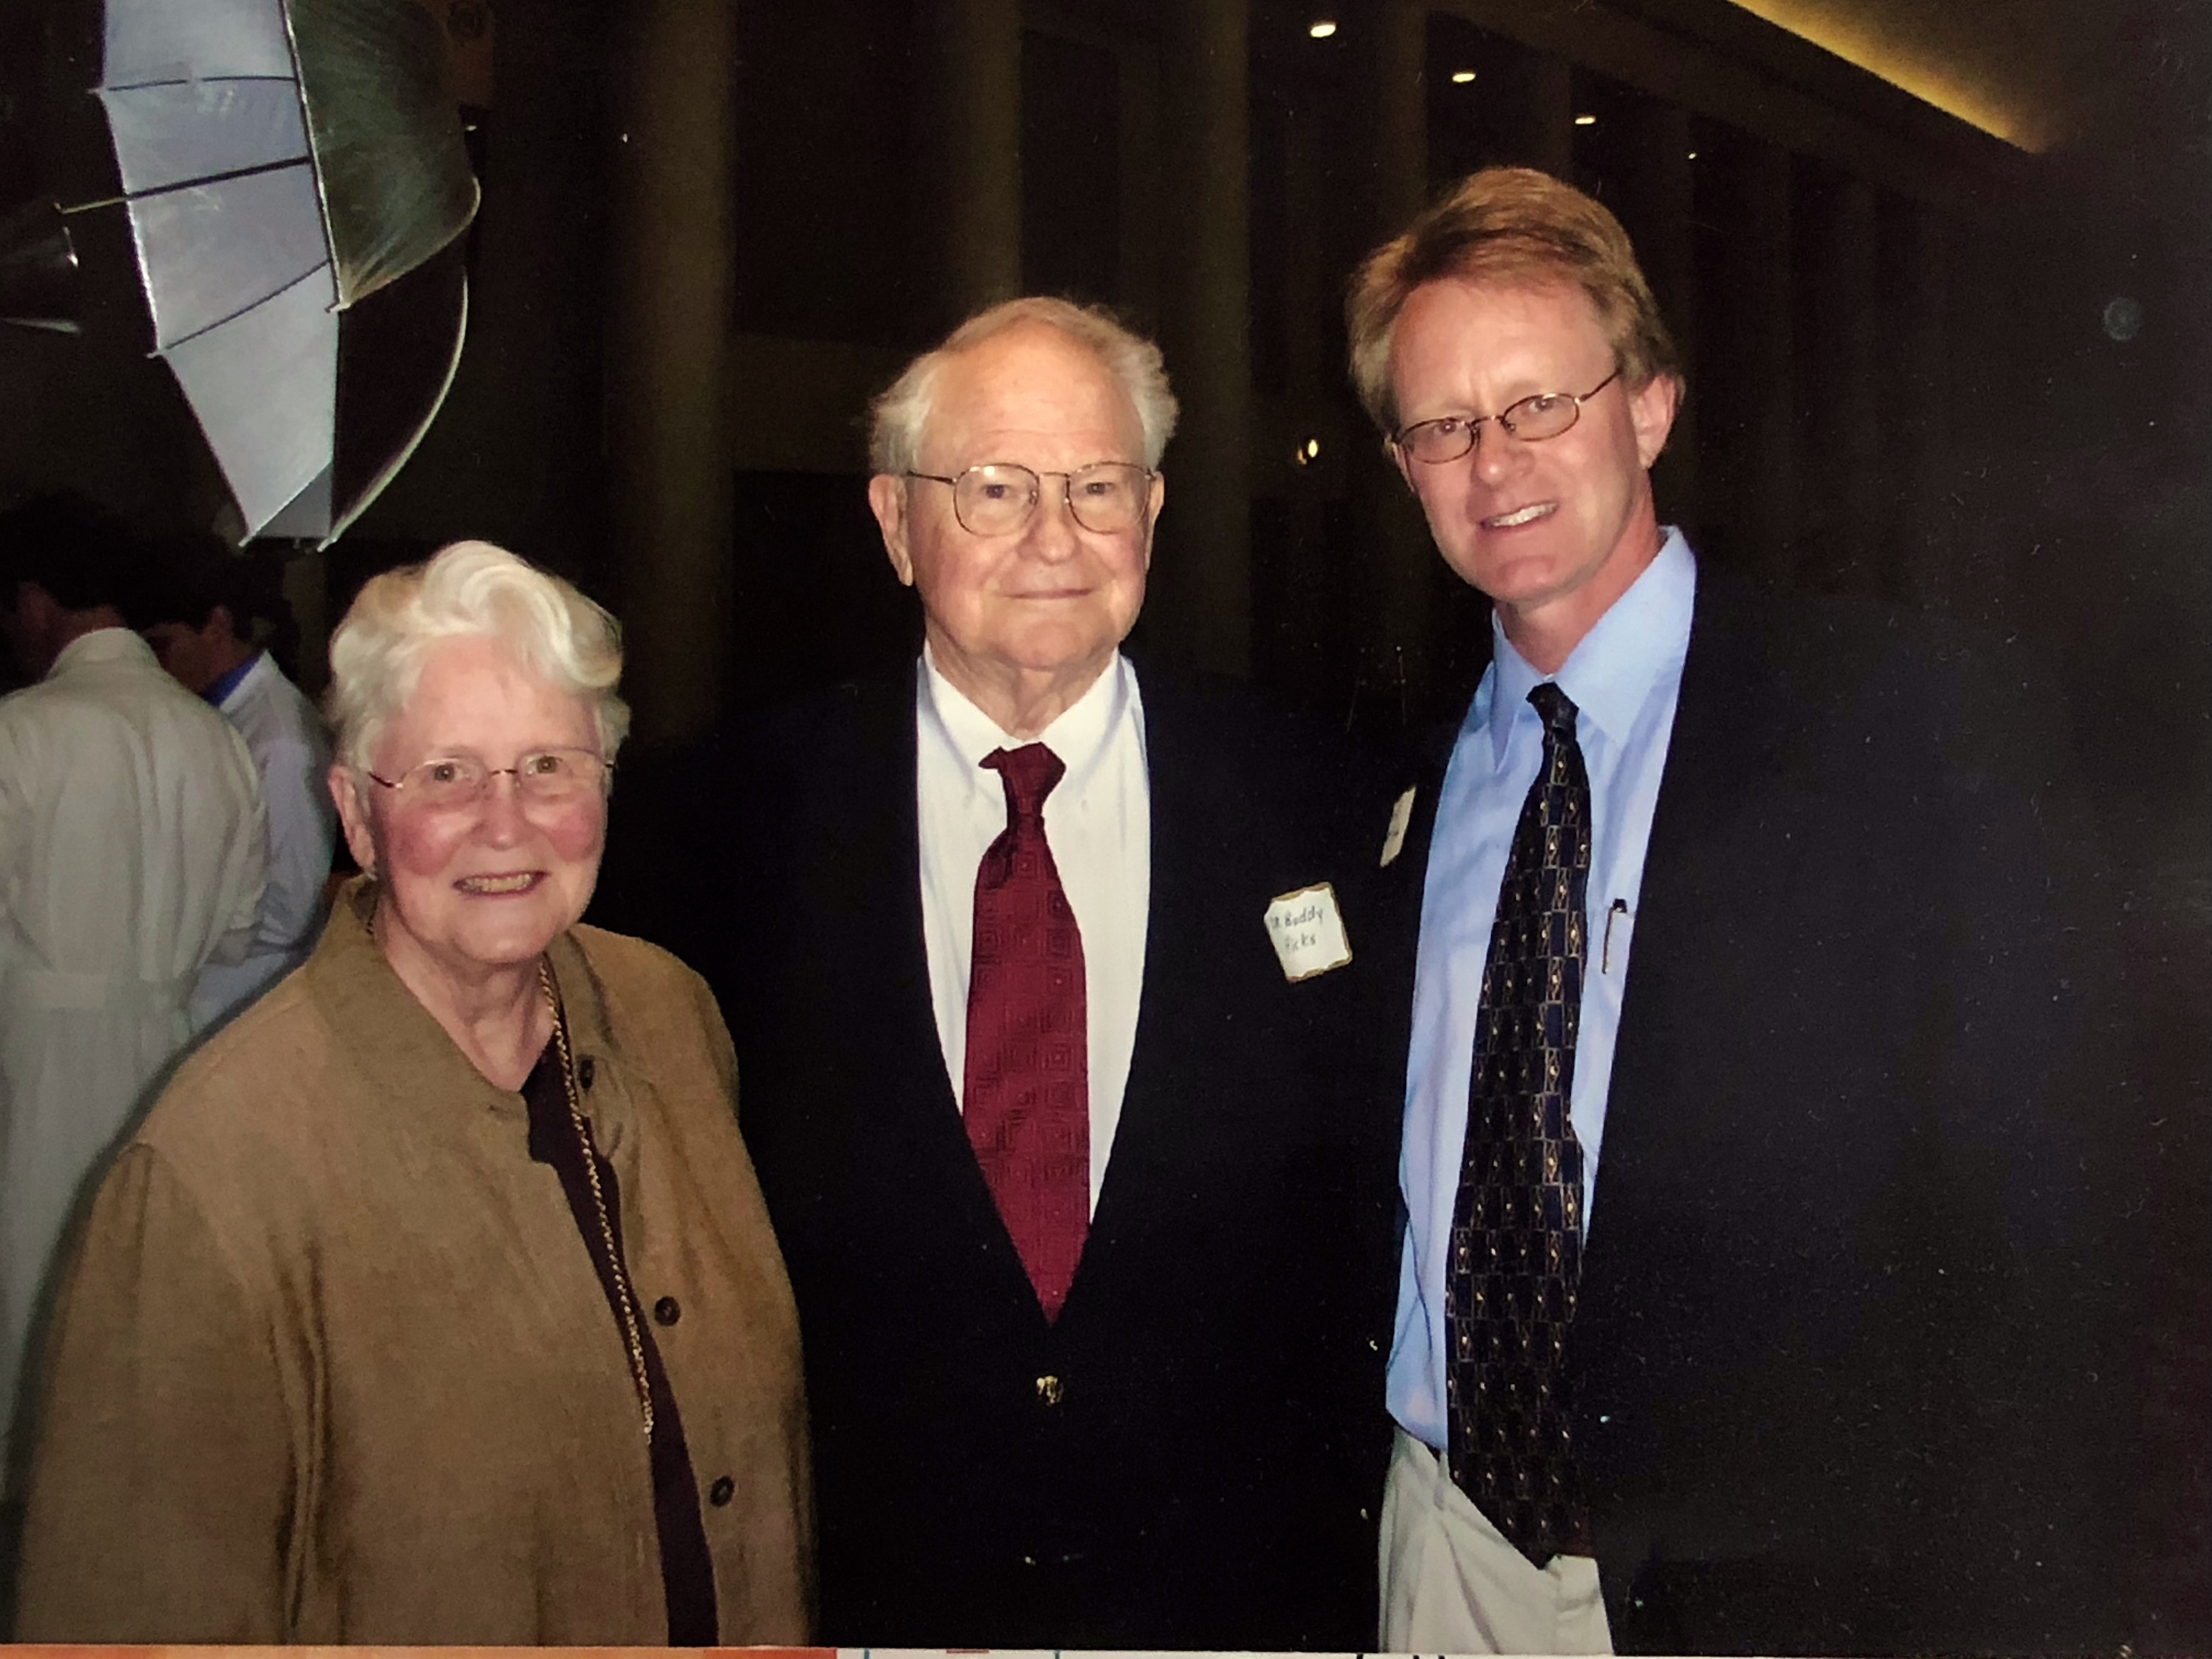 Dr. Anderson with his mentor Dr. Hicks and his wife Ann Hicks